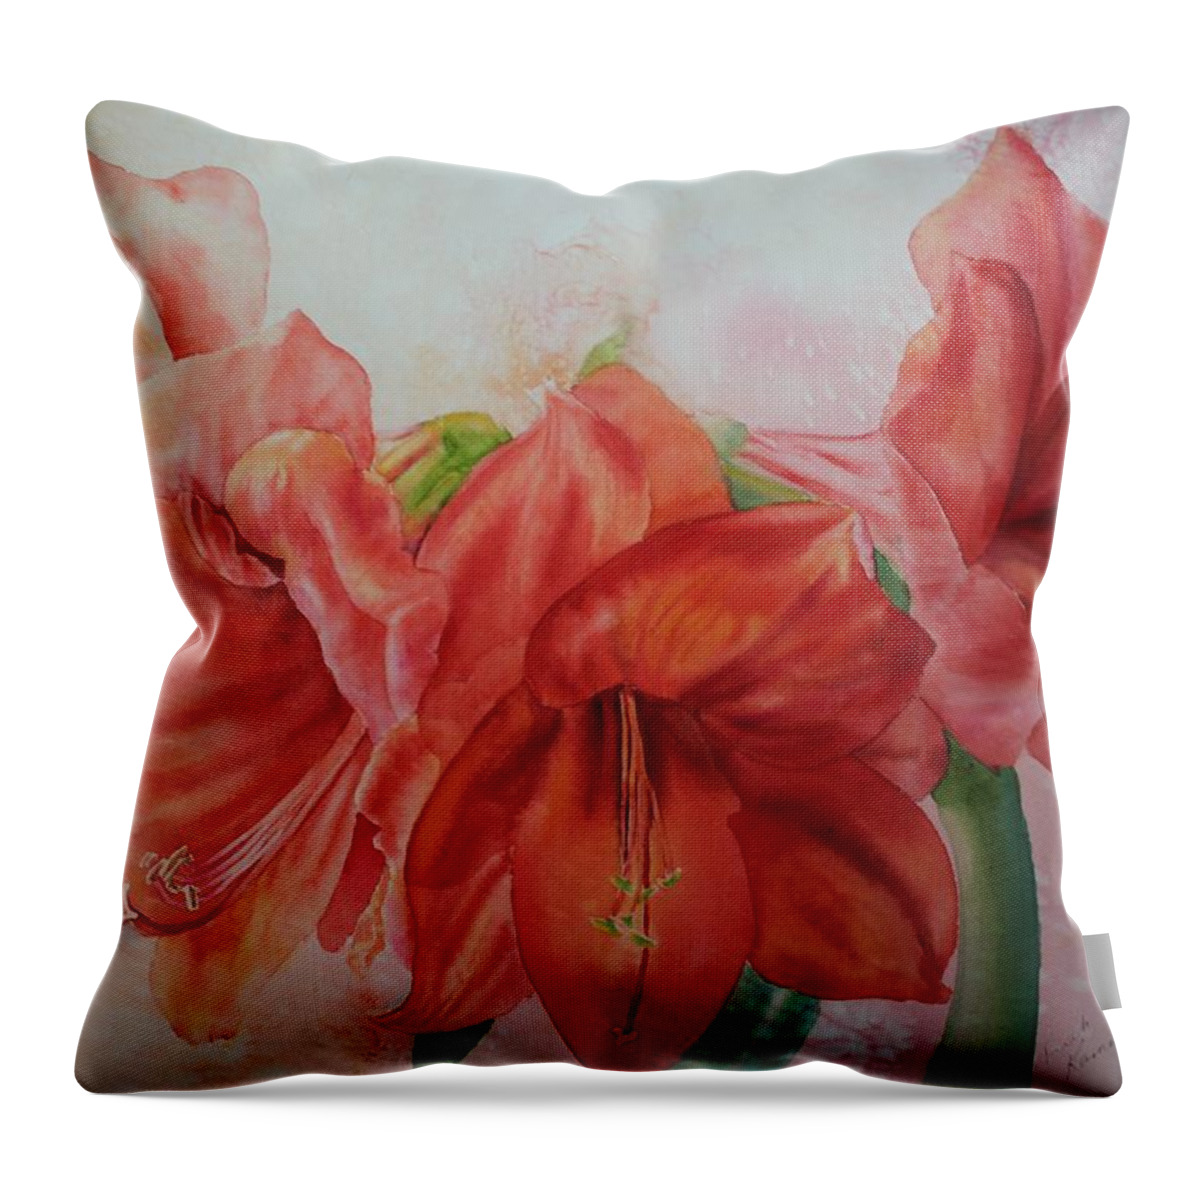 Flowers Throw Pillow featuring the painting Amarylis by Ruth Kamenev